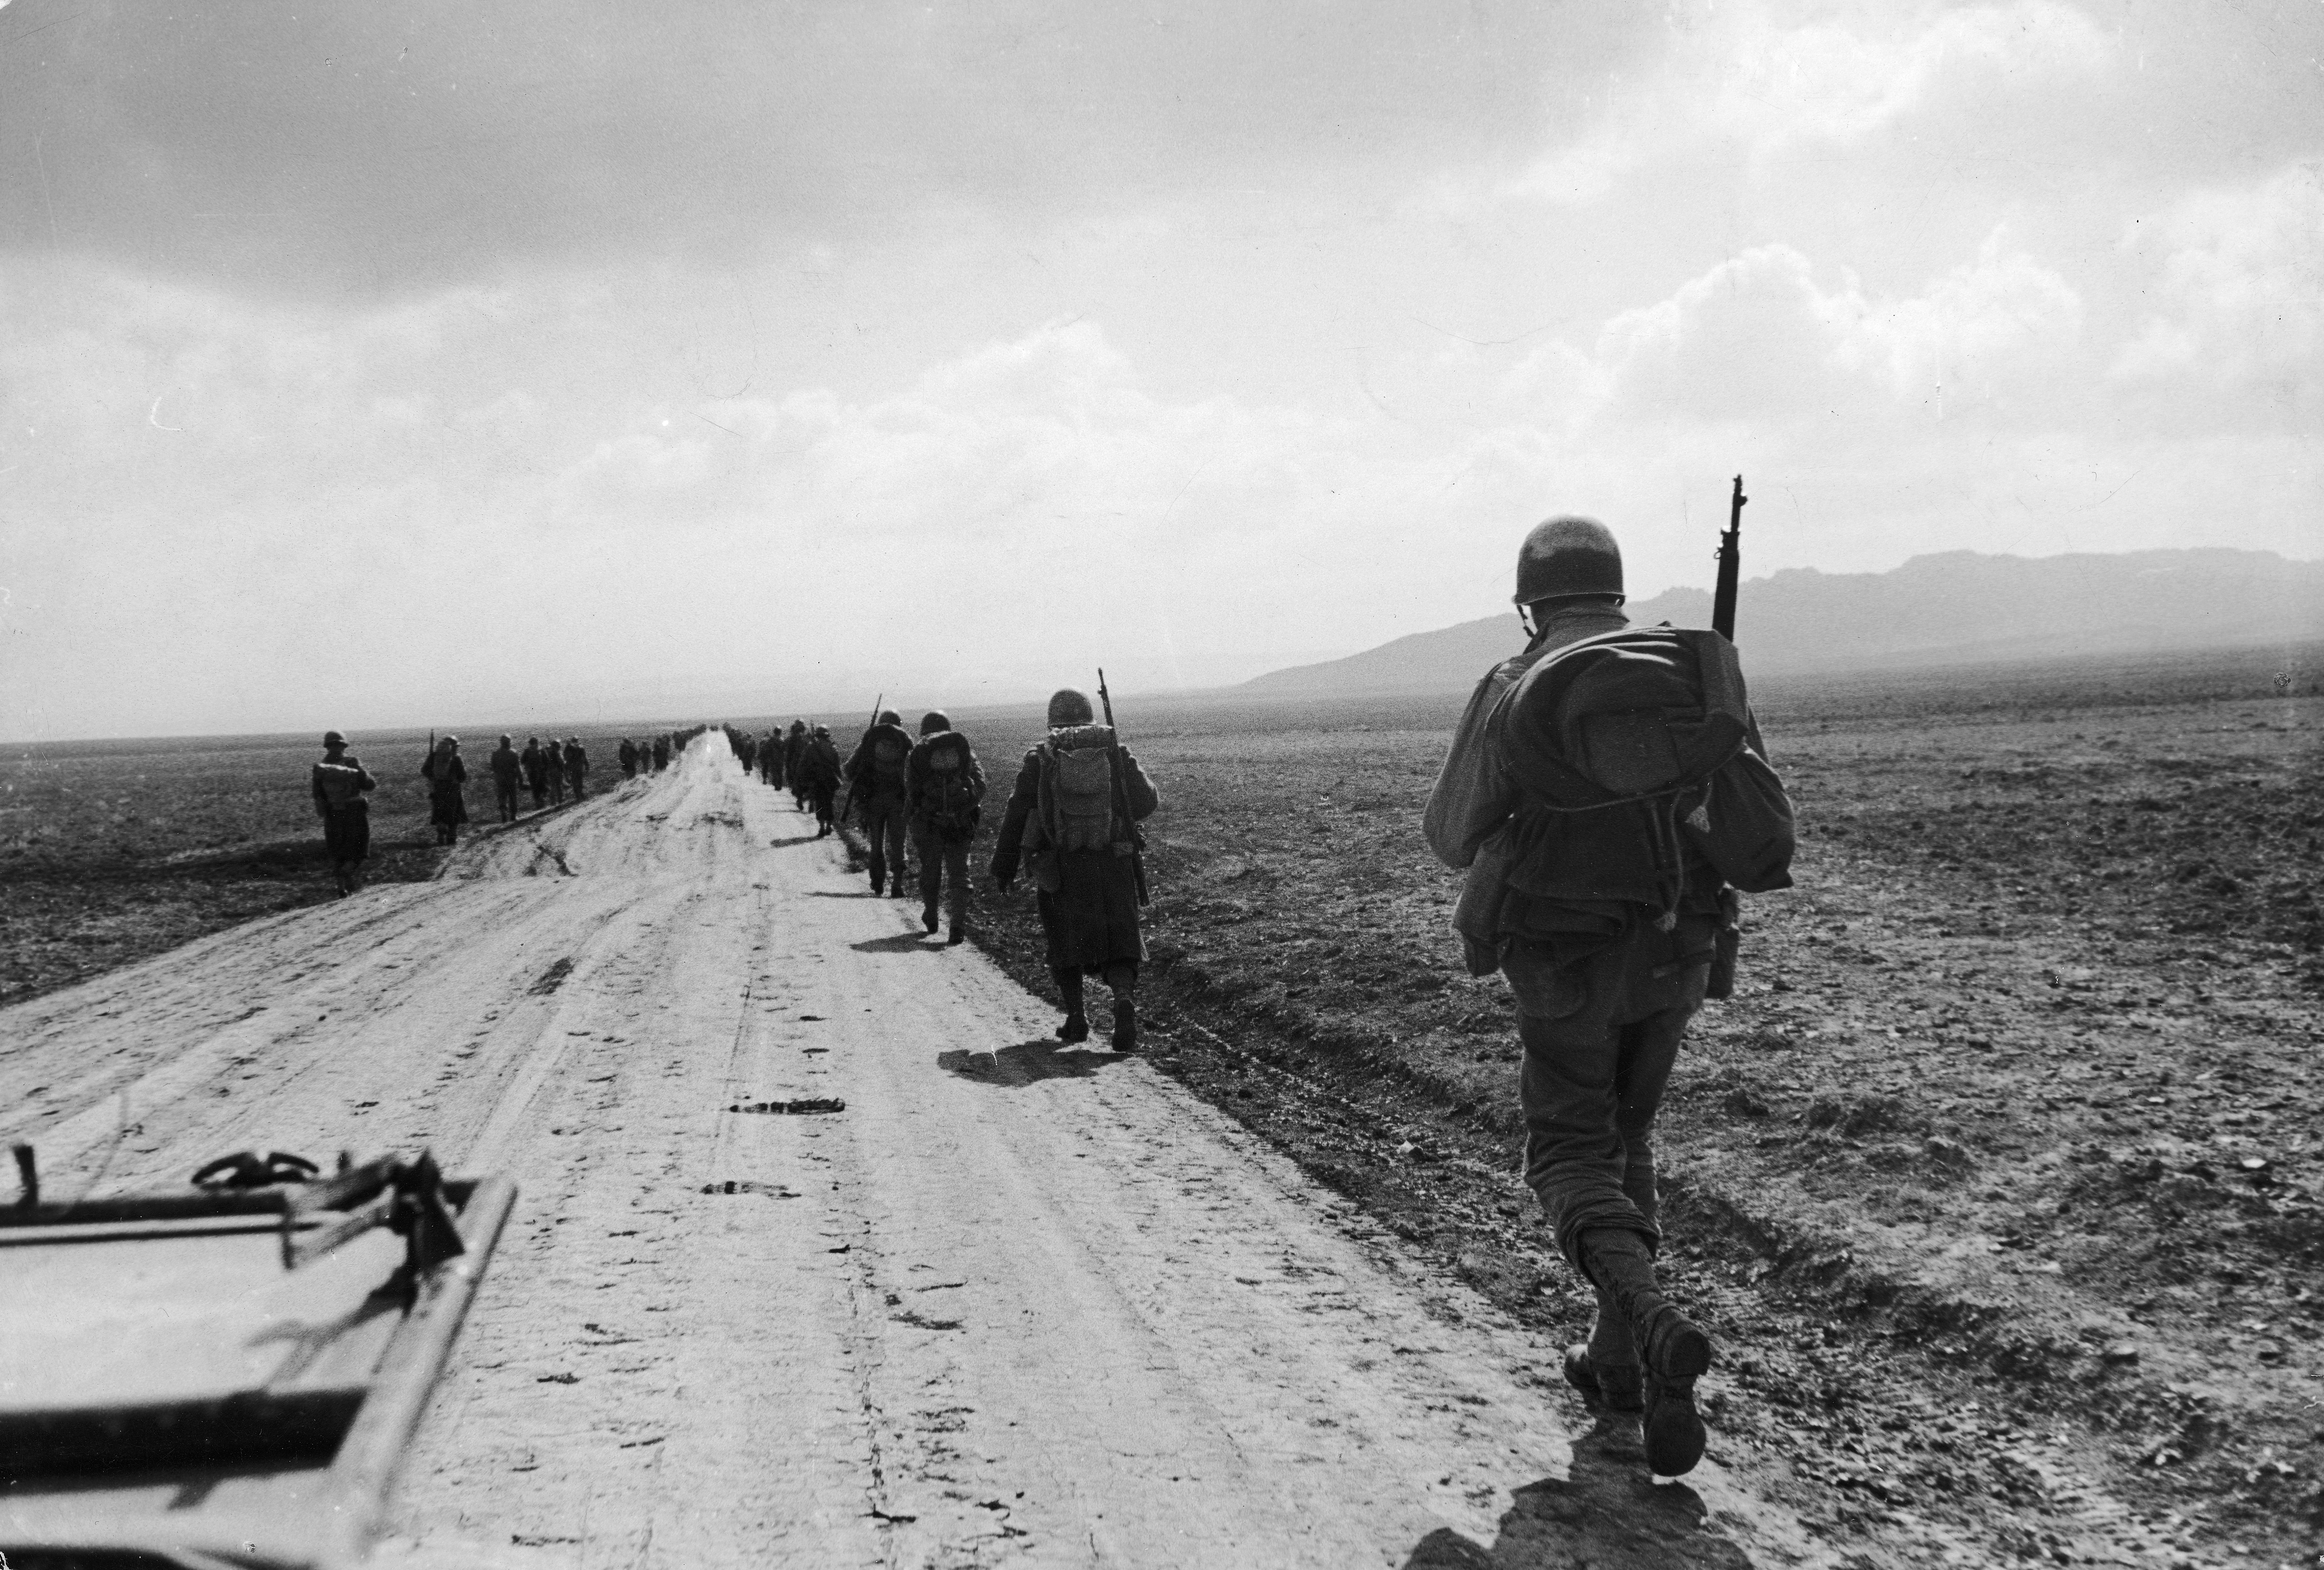 A group of soldiers rucking on a dirt road.